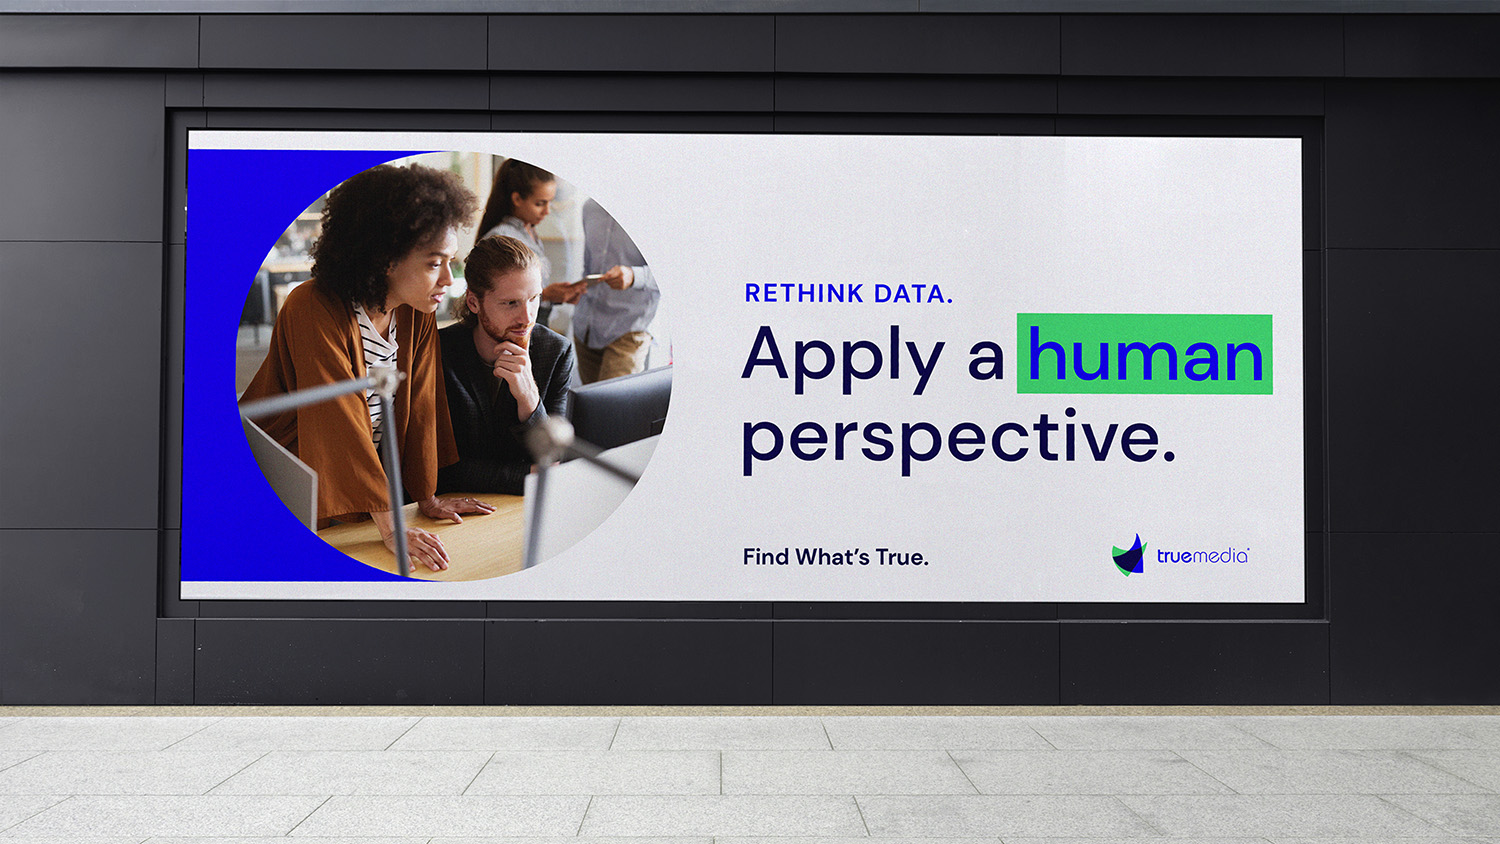 A billboard with True Media's brand and the copy "Rethink data. Apply a human perspective."